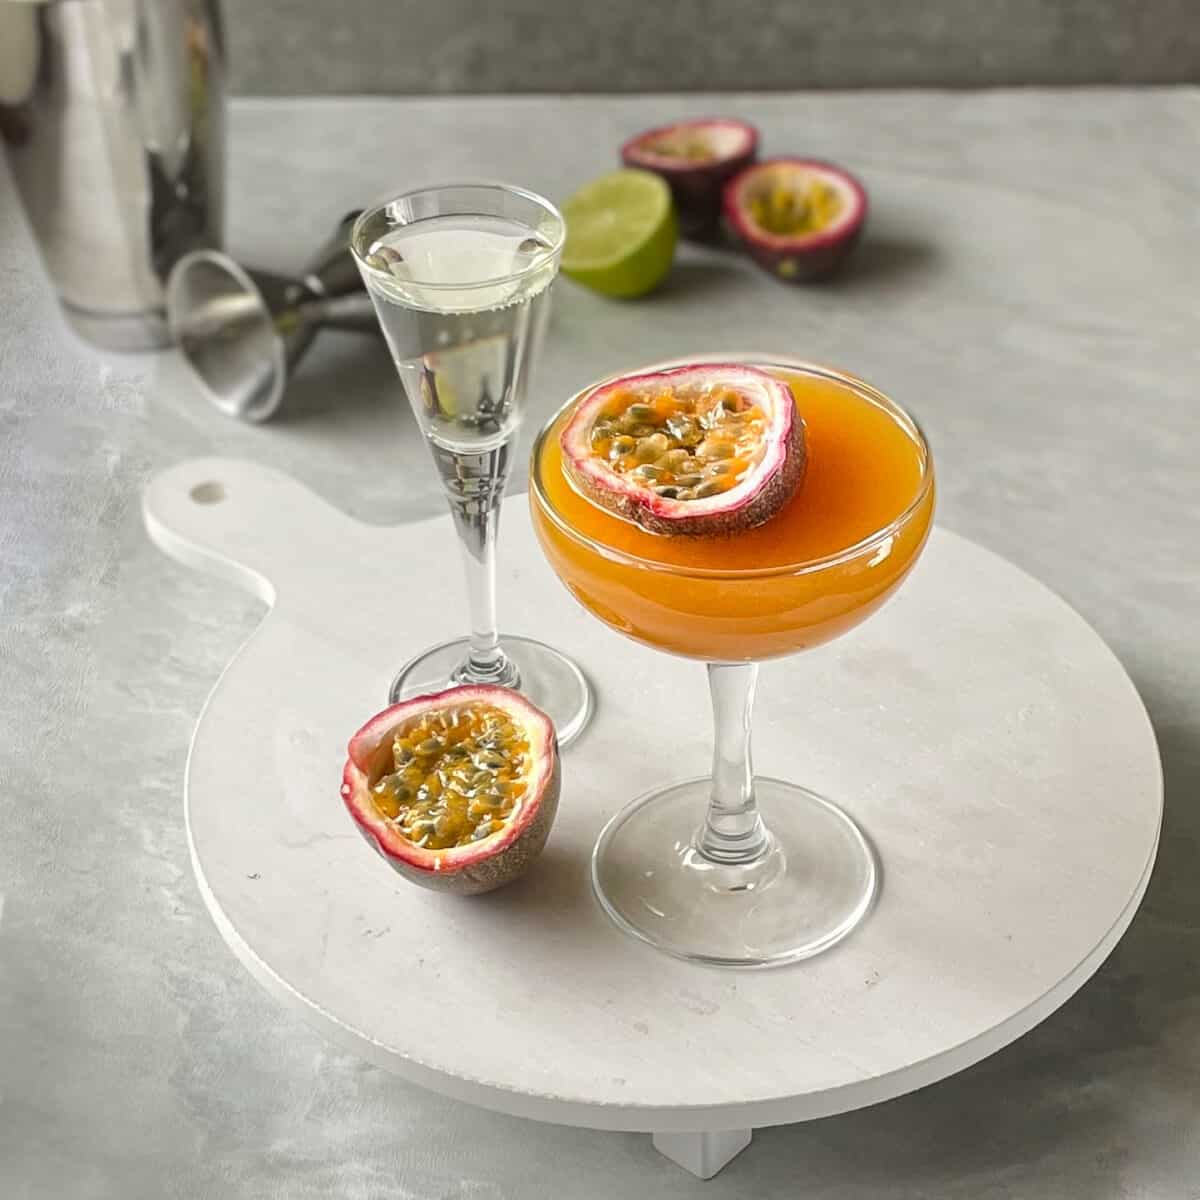 a porn star martini garnished with half a passion fruit on a tray with sparkling wine and passion fruit half.